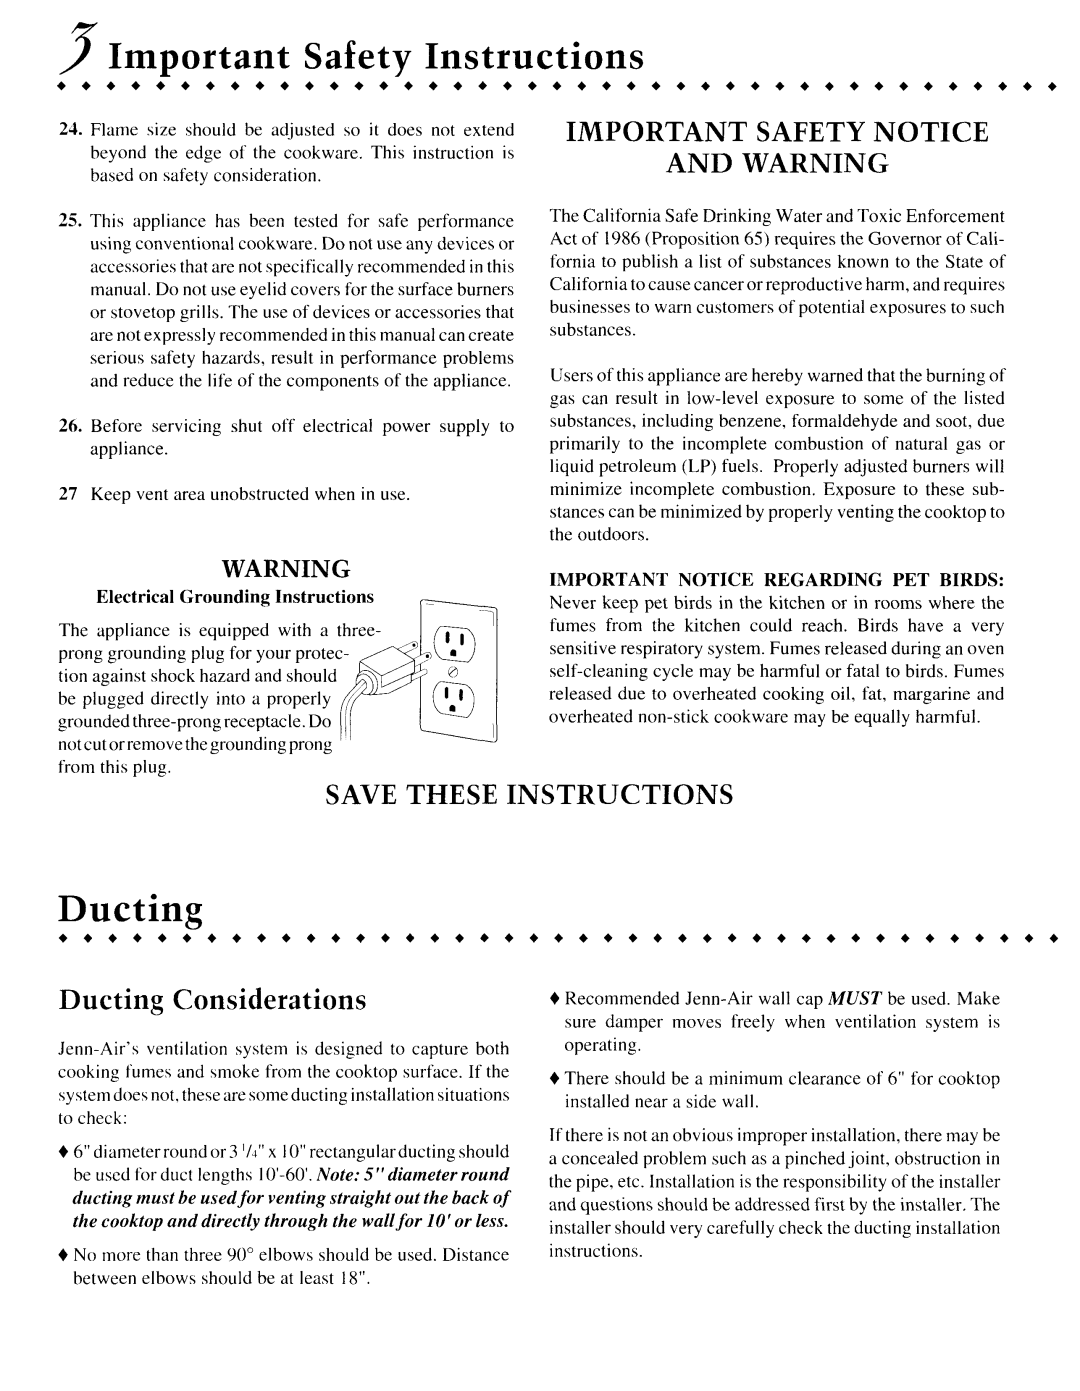 Jenn-Air CVGX2423 manual sImportant, Important Safety Notice And Warning, Save These Instructions, Ducting Considerations 